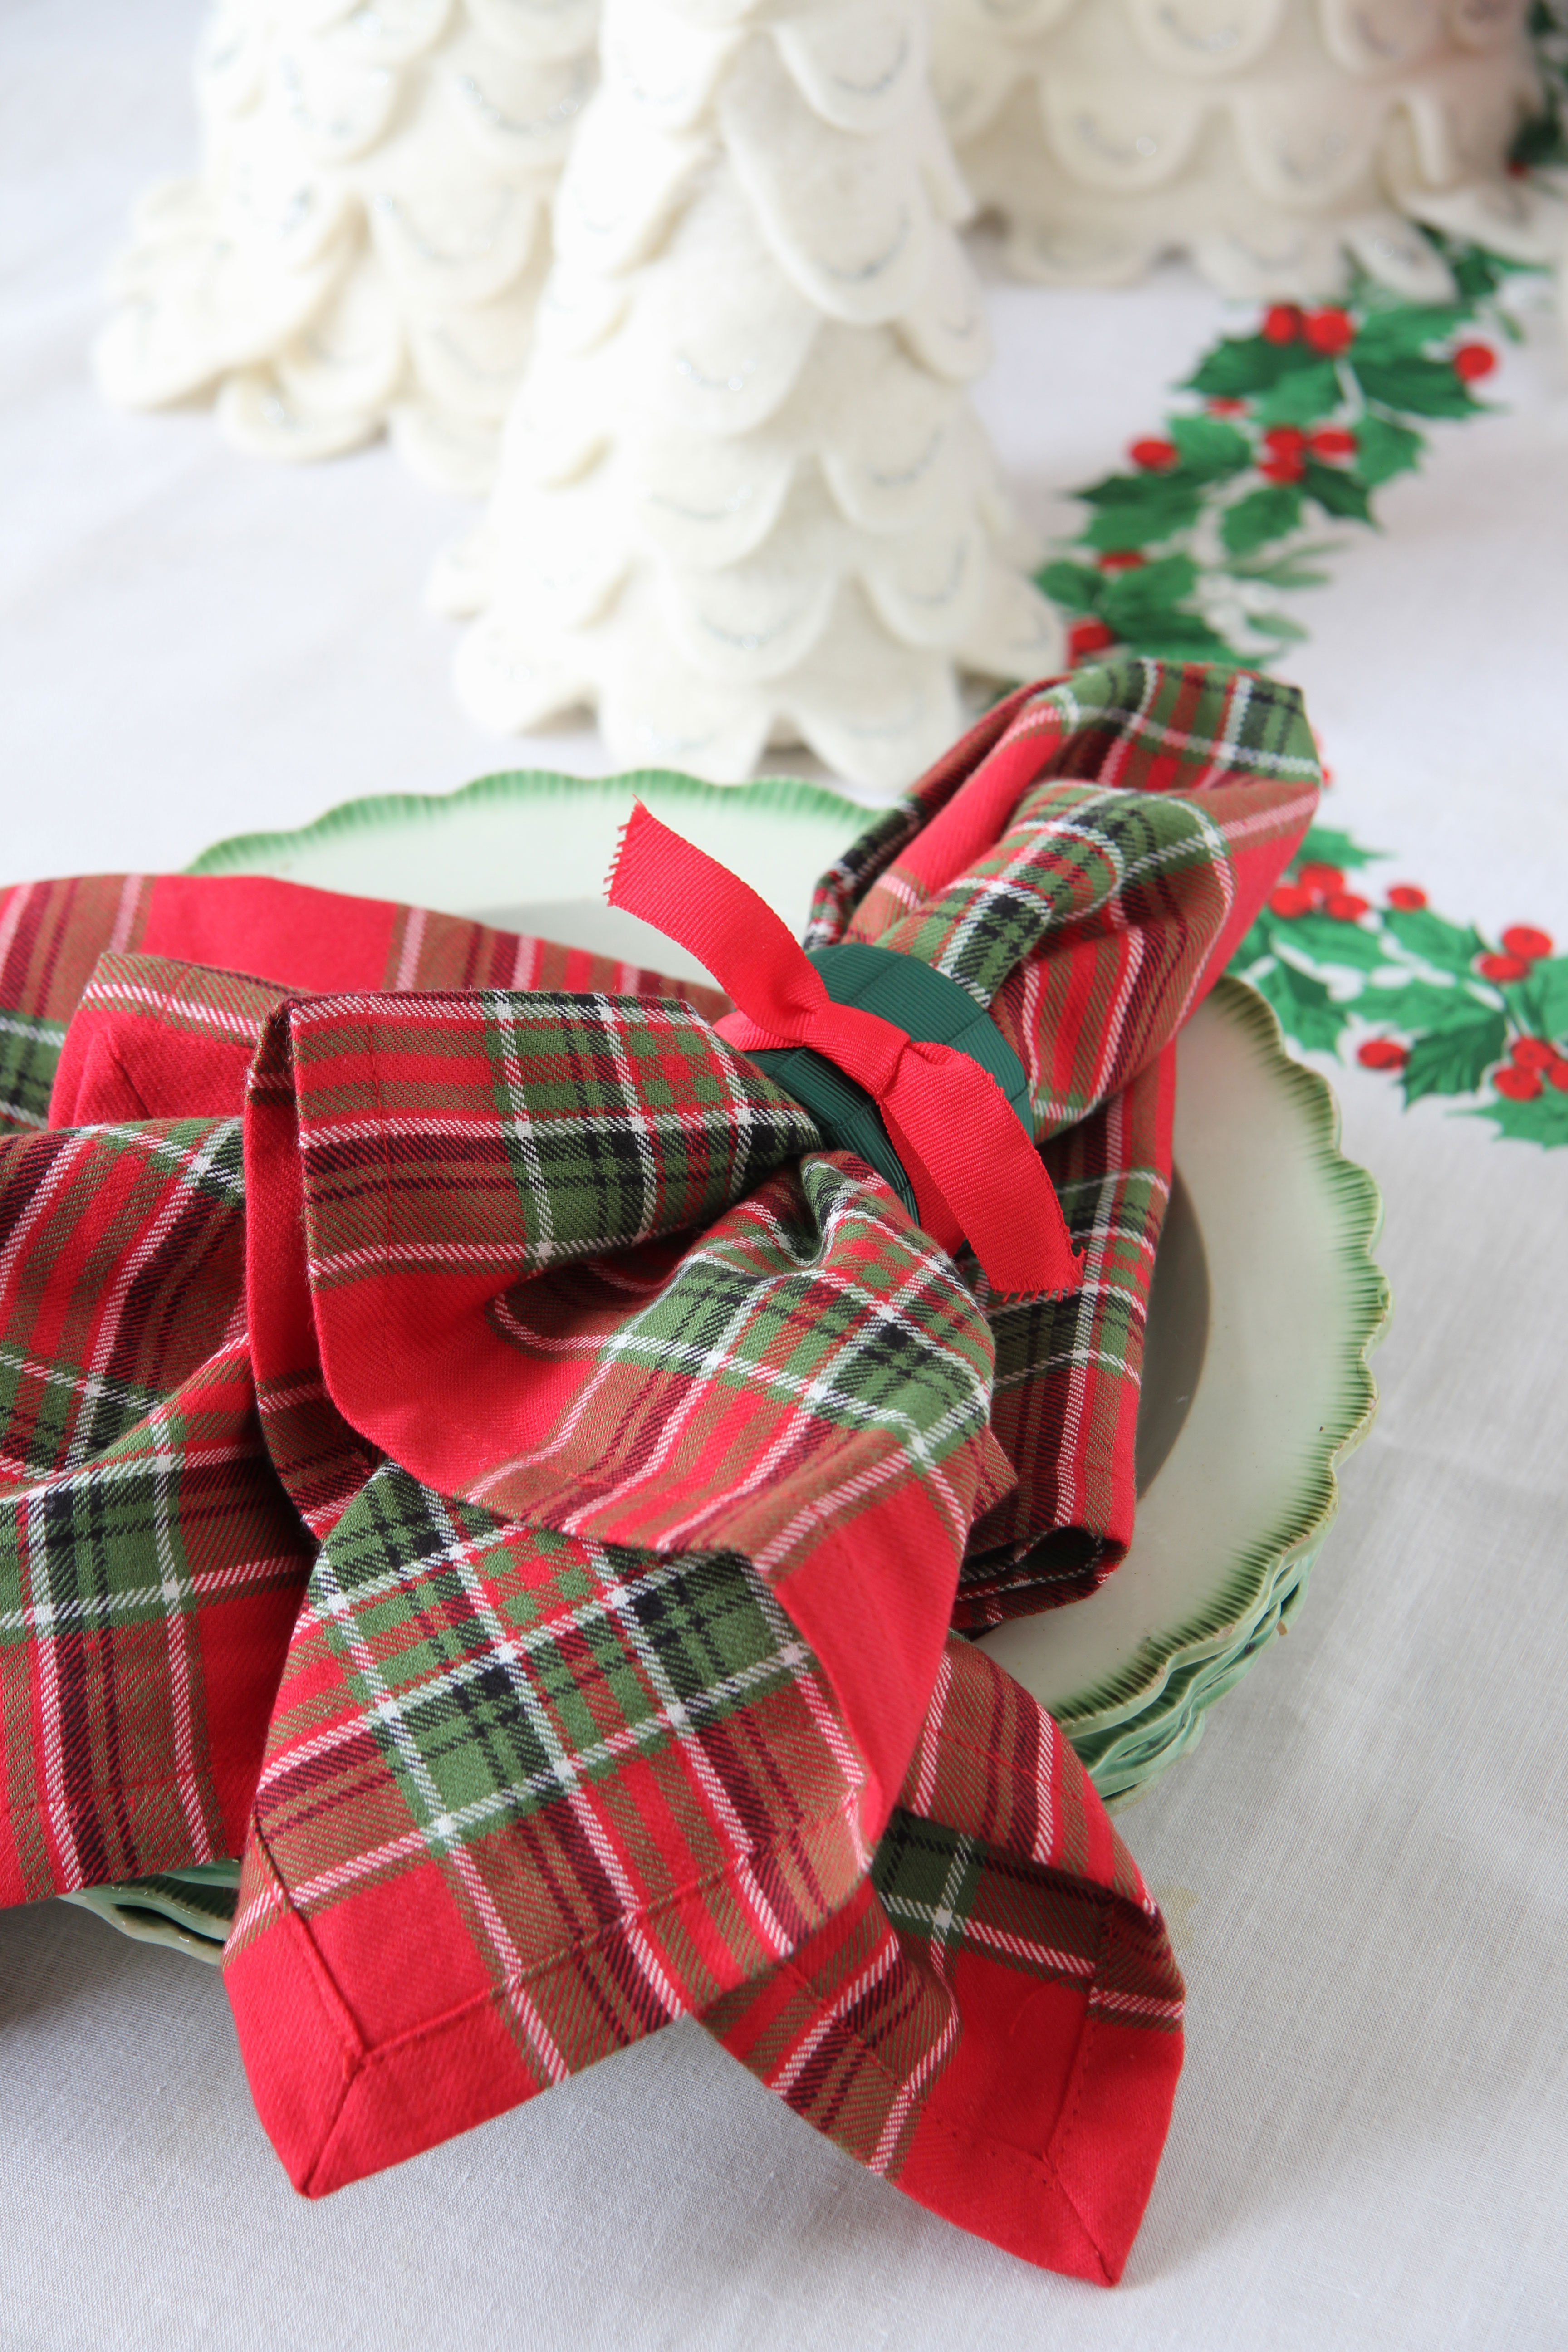 Mixing and matching your plaid, tartan and holiday linens at Christmas is a fun and festive way to decorate your table. 